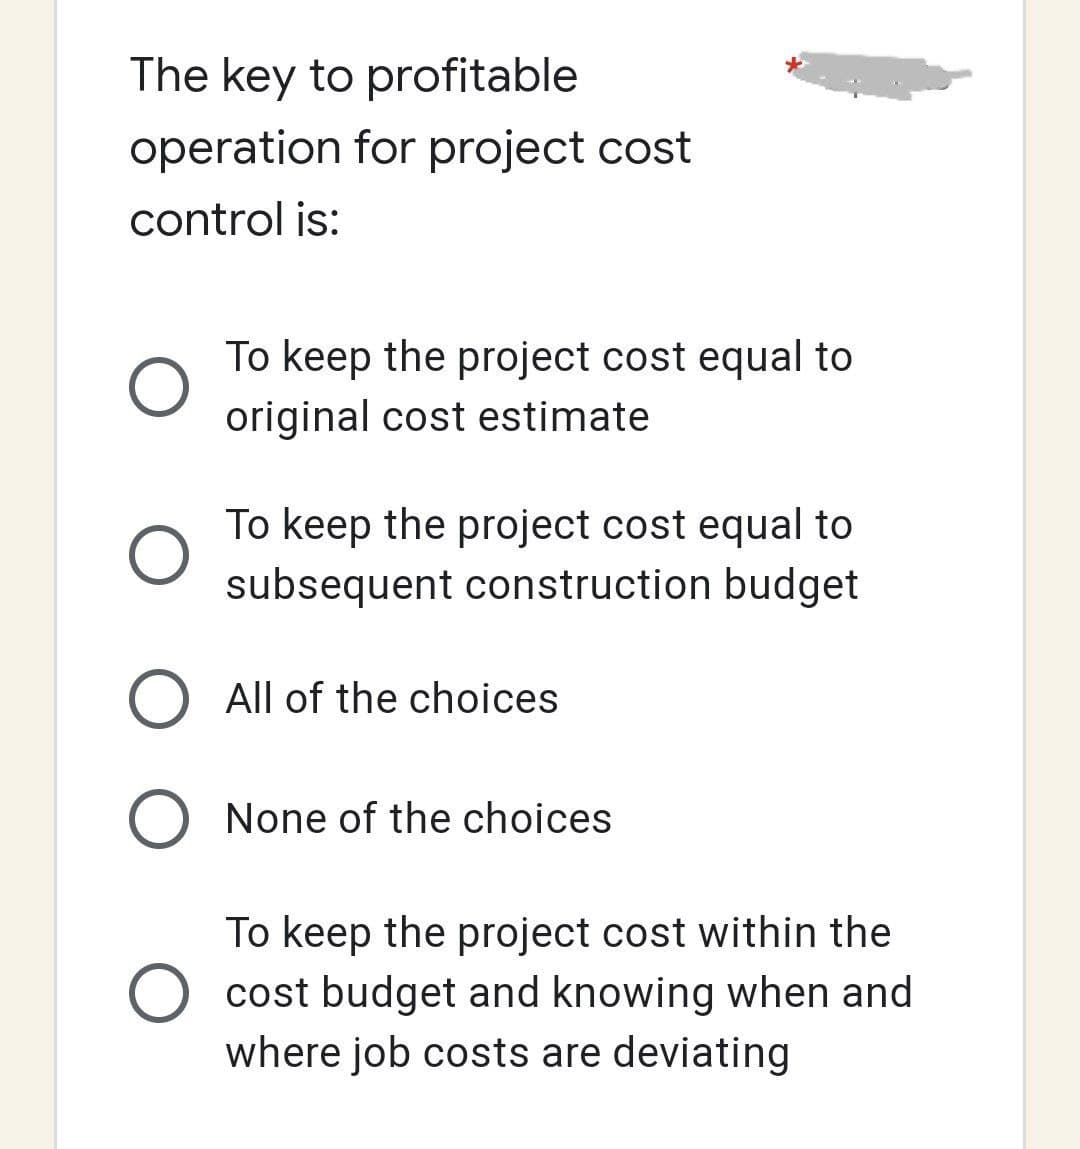 The key to profitable
operation for project cost
control is:
O
To keep the project cost equal to
original cost estimate
To keep the project cost equal to
subsequent construction budget
All of the choices
O None of the choices
To keep the project cost within the
cost budget and knowing when and
where job costs are deviating